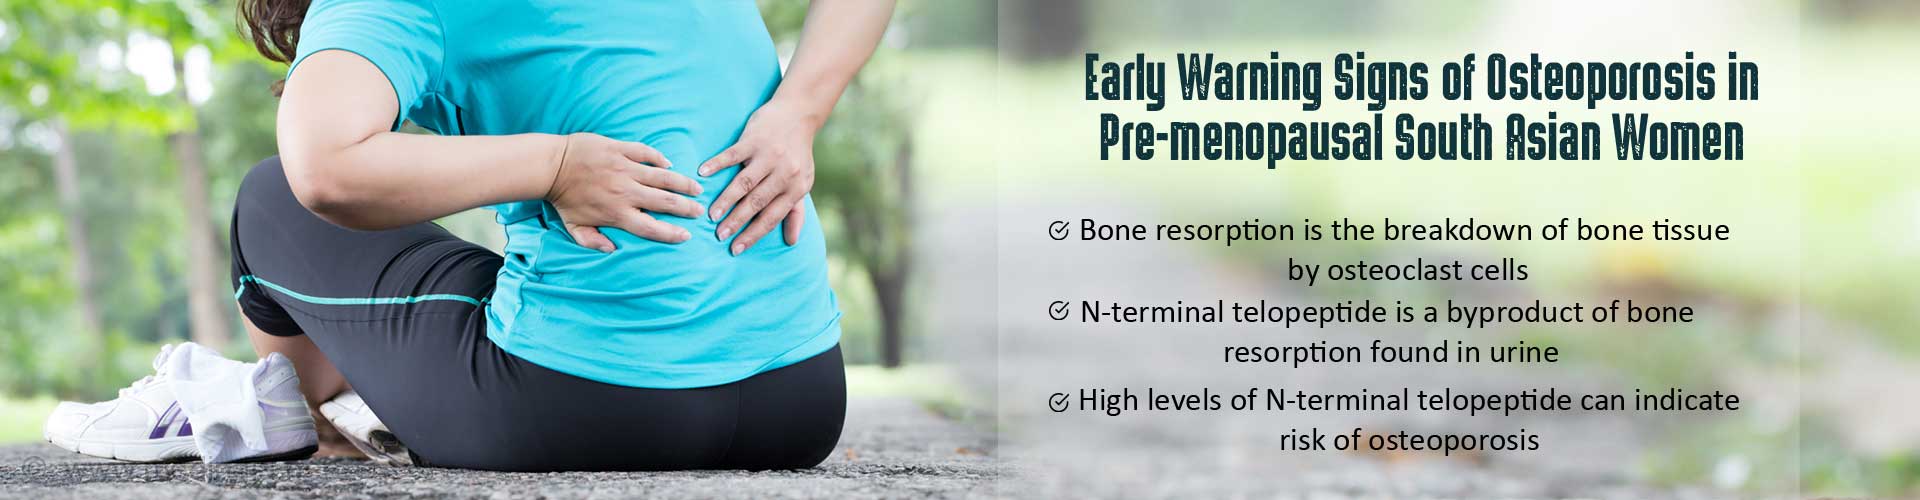 early warning signs of osteoporosis in pre-menopausal south asain women
- bone resorption is the breakdown of bone tissue by osteoclast cells
- n-terminal telopeptide is a byproduct of bone resorption found in urine
- high levels of n-terminal telopeptide can indicate rick of osteoporosis